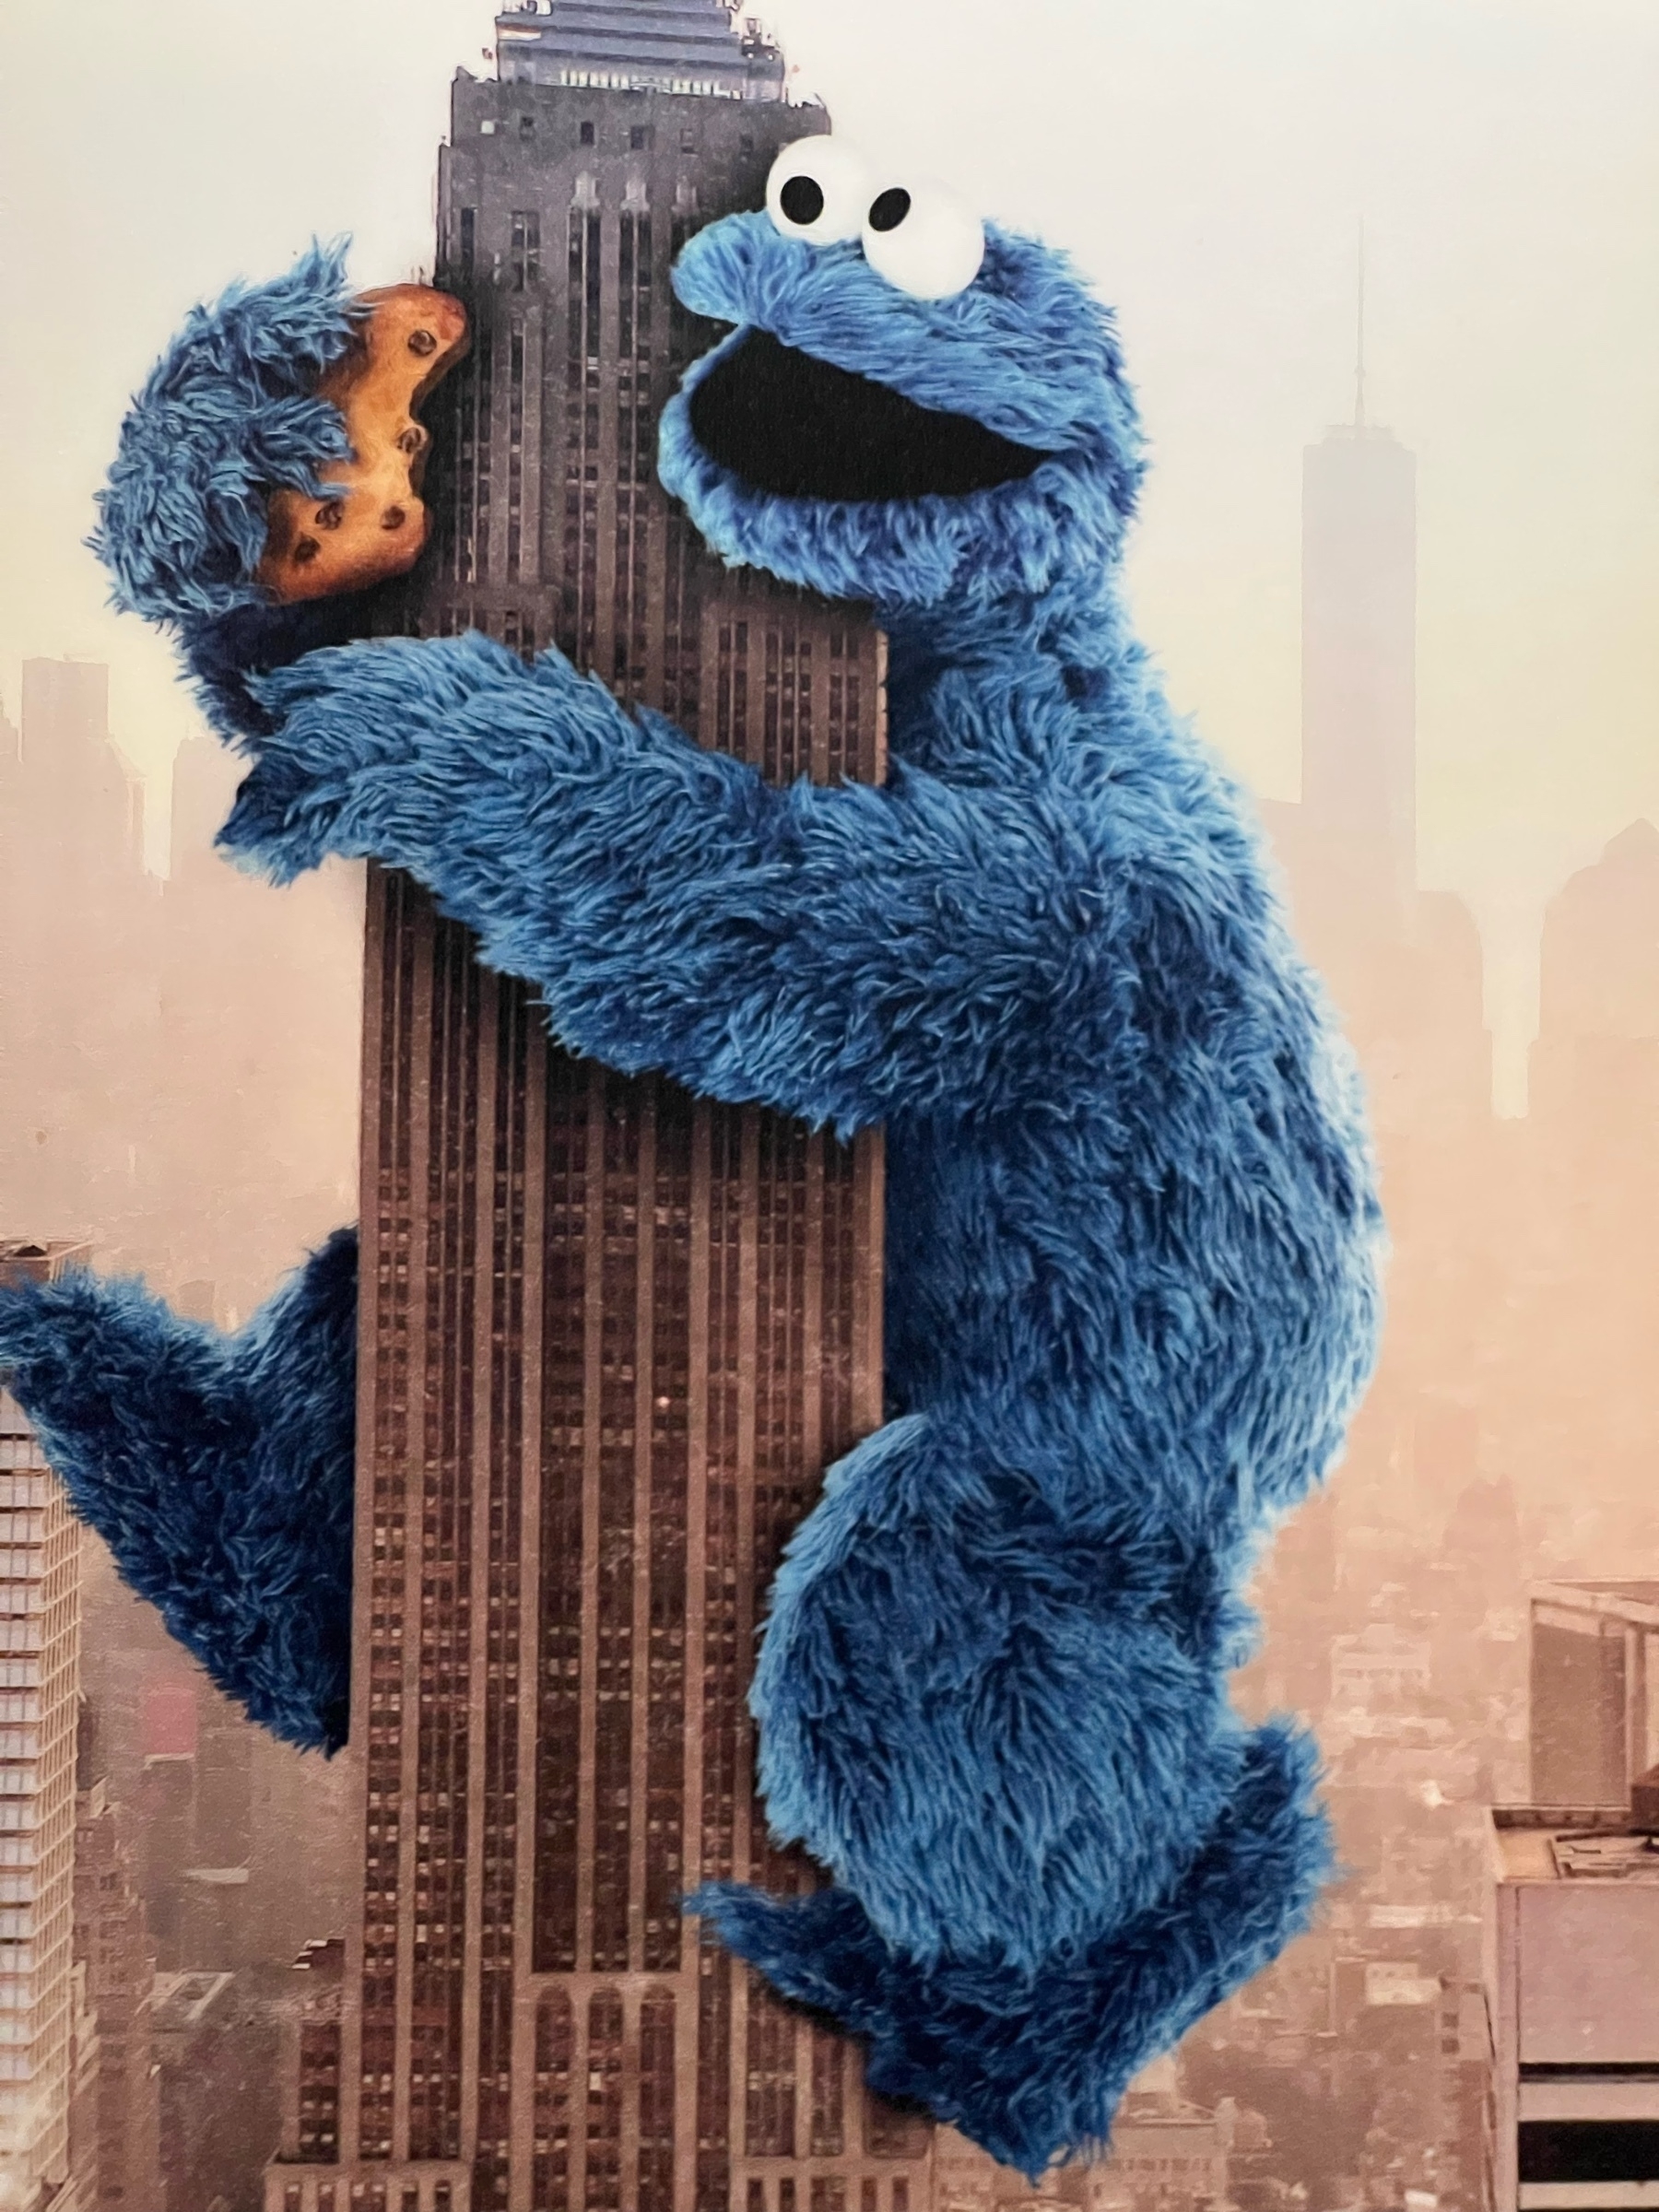 The Cookie Monster on the Eiffel Tower, eating a cookie